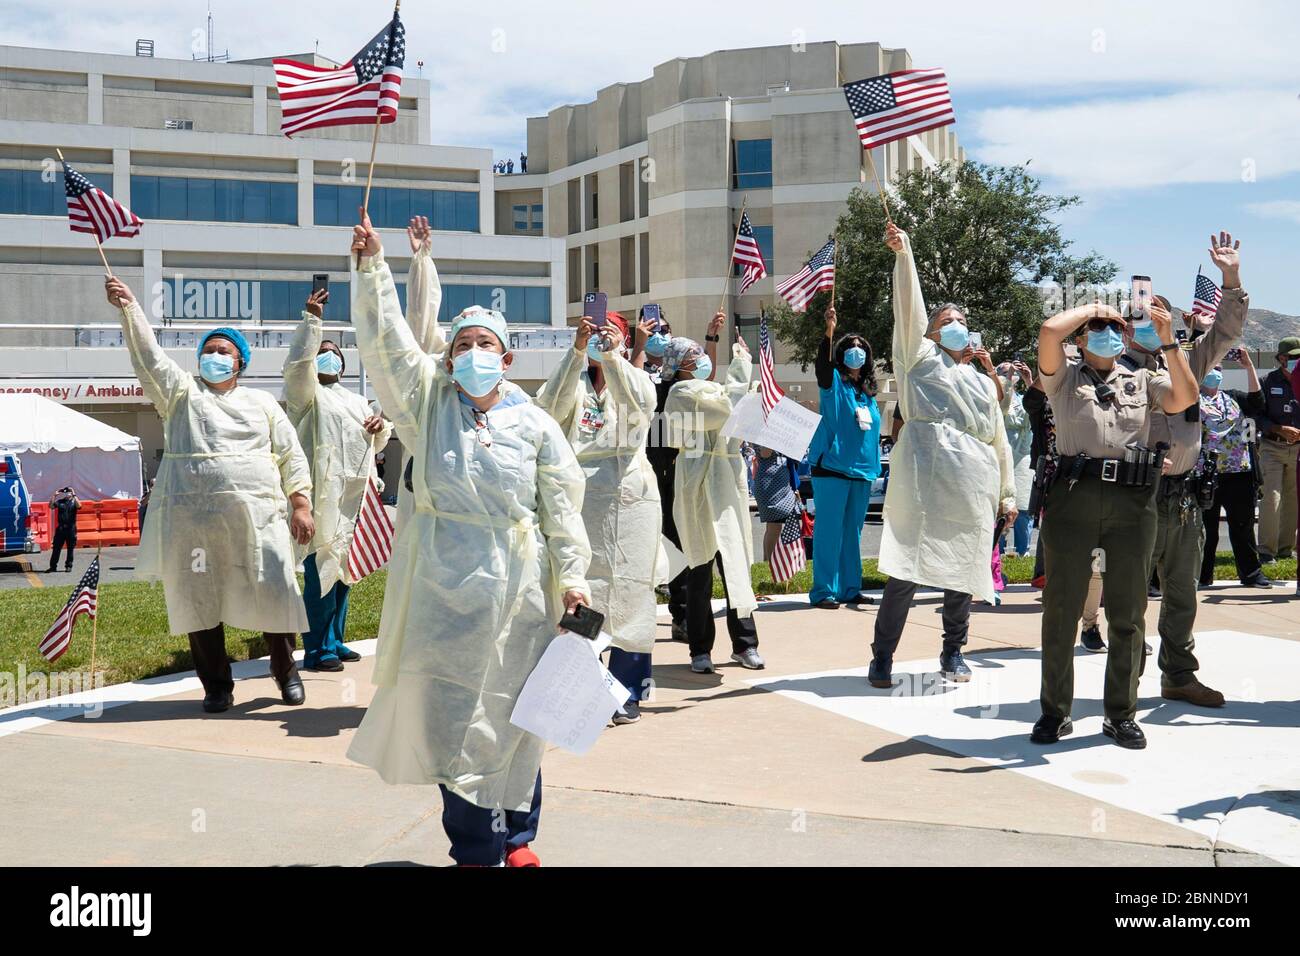 Moreno Valley, United States. 14th May, 2020. First responders and medical personnel wave and cheer as an U.S. Air Force KC-135 Stratotanker flies over the crowd at the Riverside University Health System Medical Cente, during the America Strong flyover May 14, 2020 in Moreno Valley, California. America Strong is a salute from the Navy and Air Force to recognize healthcare workers, first responders, and other essential personnel in a show of national solidarity during the COVID-19 pandemic. Credit: Nick Kibbey/U.S. Navy/Alamy Live News Stock Photo